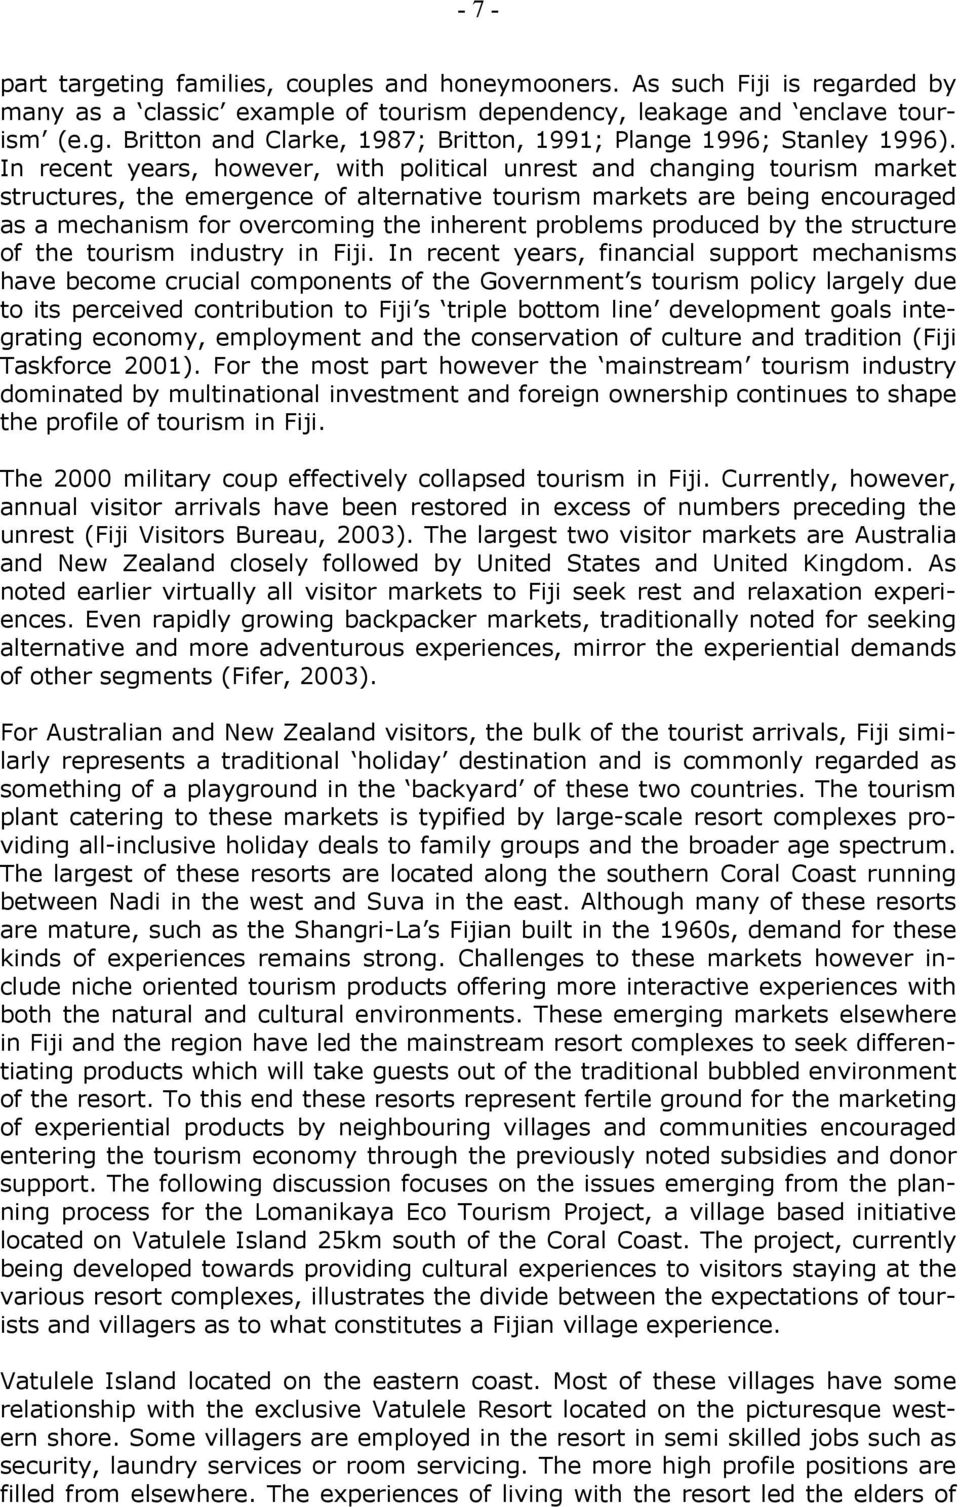 problems produced by the structure of the tourism industry in Fiji.